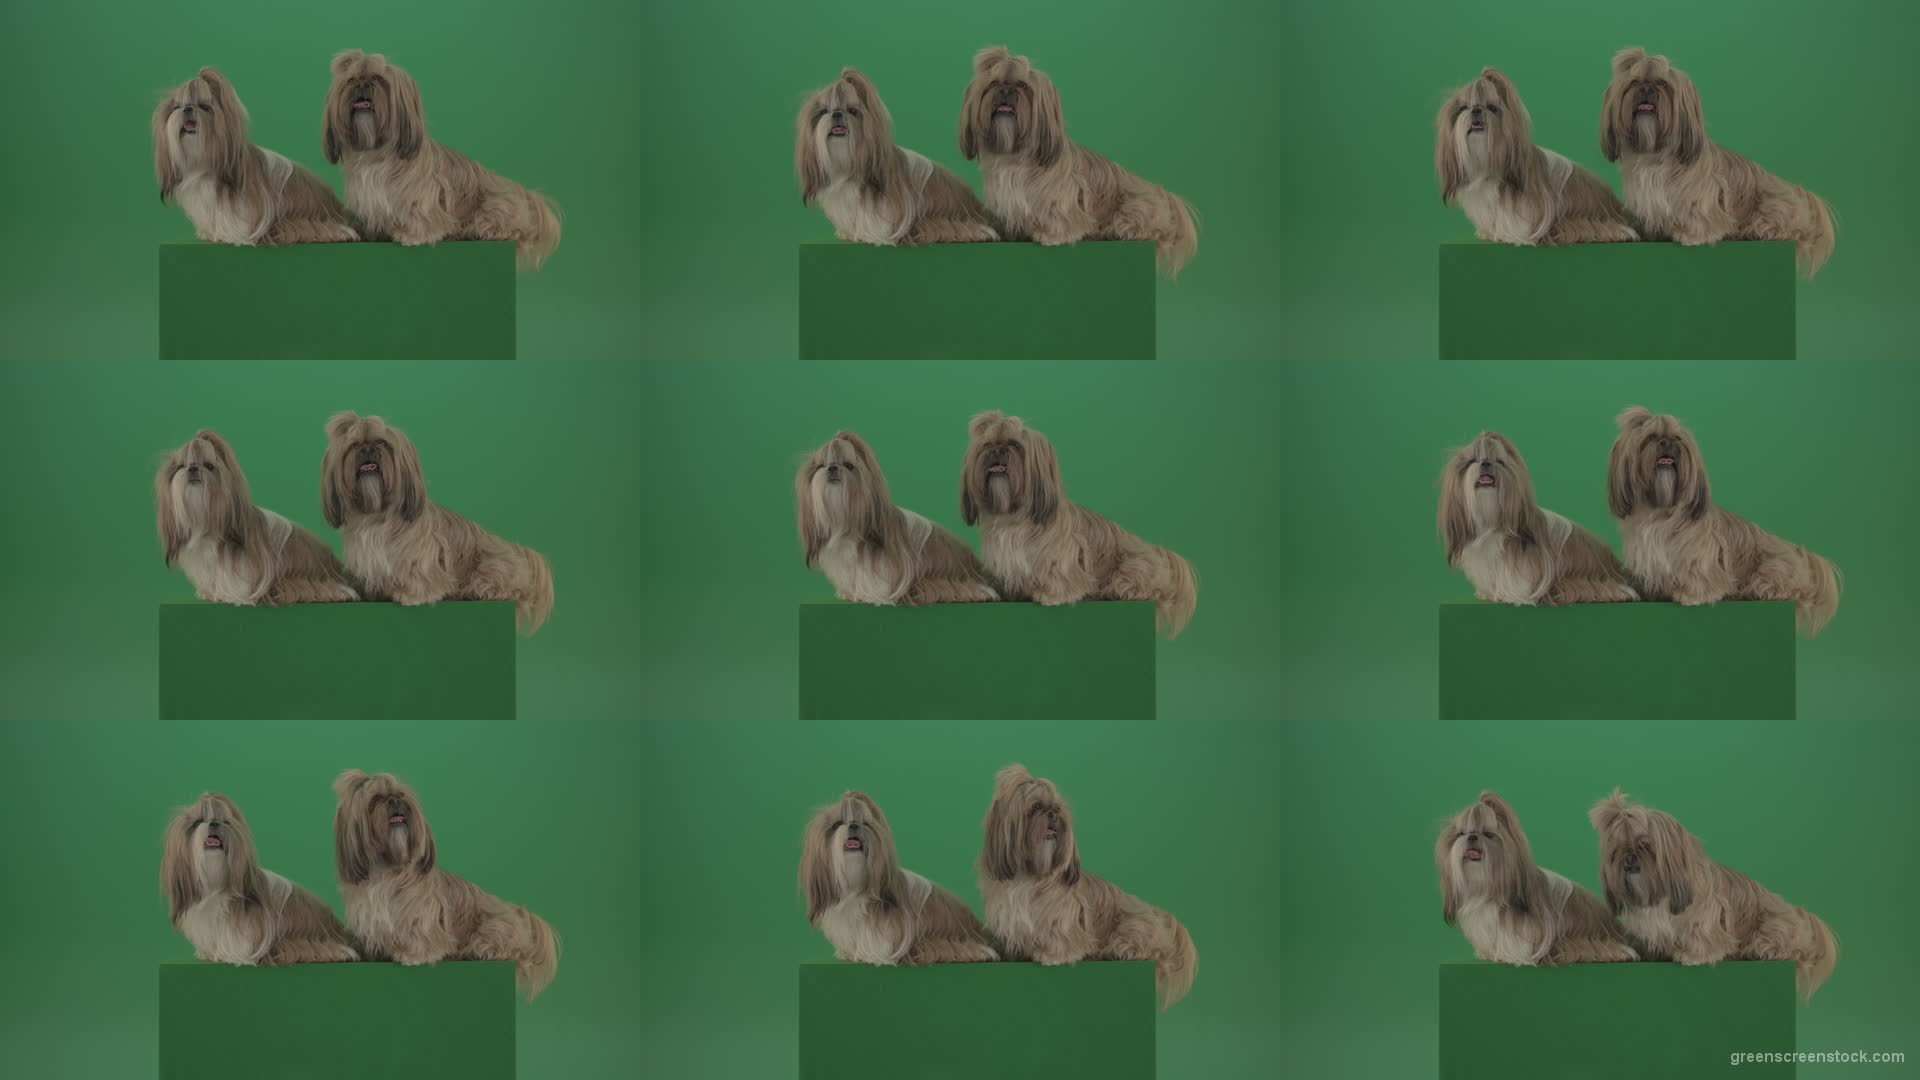 Awards-winners-Shih-tzu-fashion-luxury-expensive-dog-in-side-view-isolated-on-green-screen Green Screen Stock